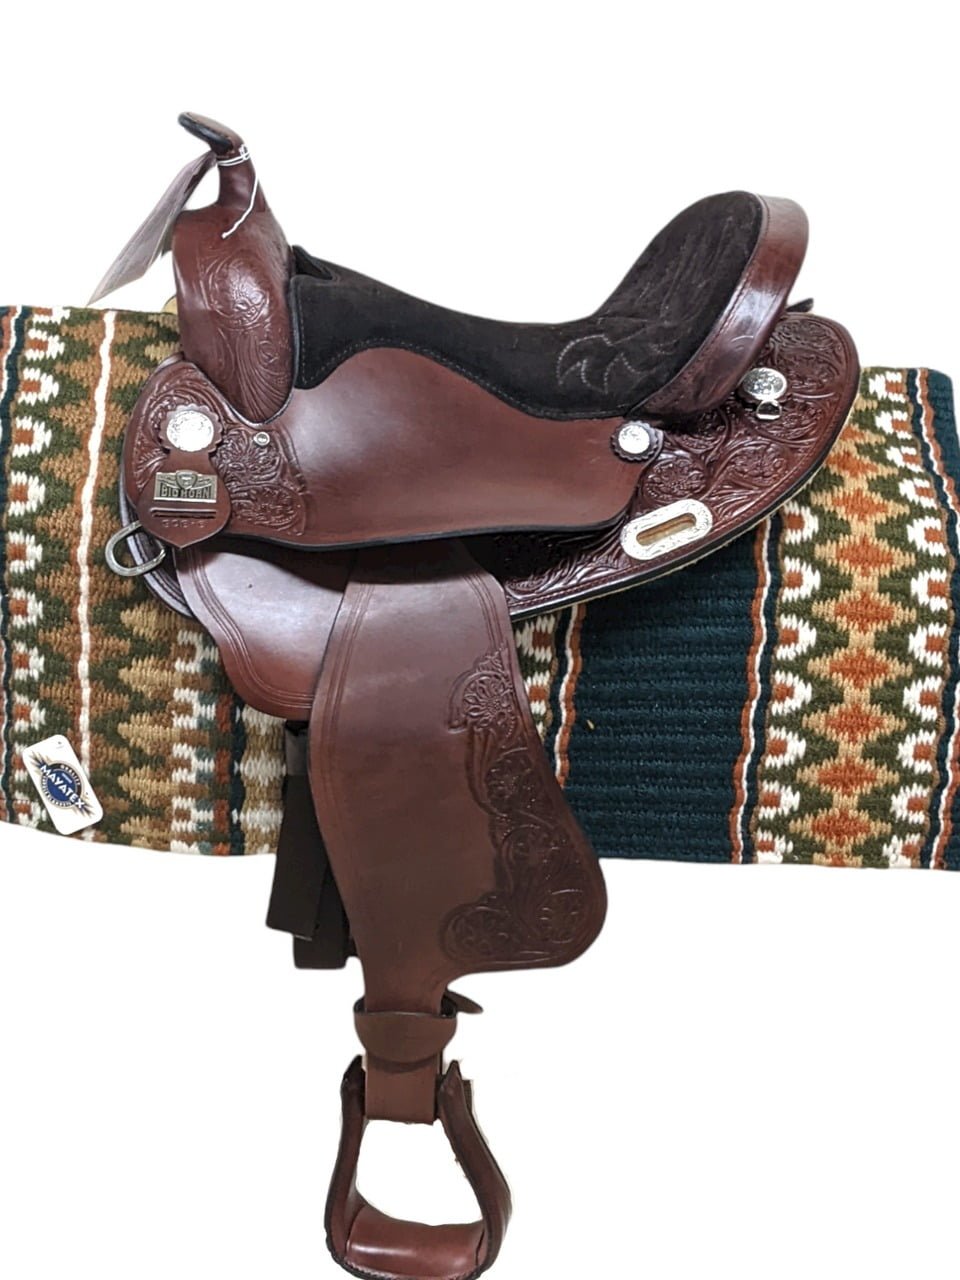 This saddle is at an amazing price point! The Big Horn A00908 Haflinger features in-skirt rigging, beautiful tooling complete with border tooling, and decorative conchos. The suede padded seat and padded stirrups make for a comfortable ride. This saddle has a 4" cantle, which is ideal for riders who like a higher cantle. Weight: Approx. 22 lbs Gullet: 7.5" mid-concho to mid concho Finished Seat Size: 17" Skirt Length: 23" Tree Size: 17.5"